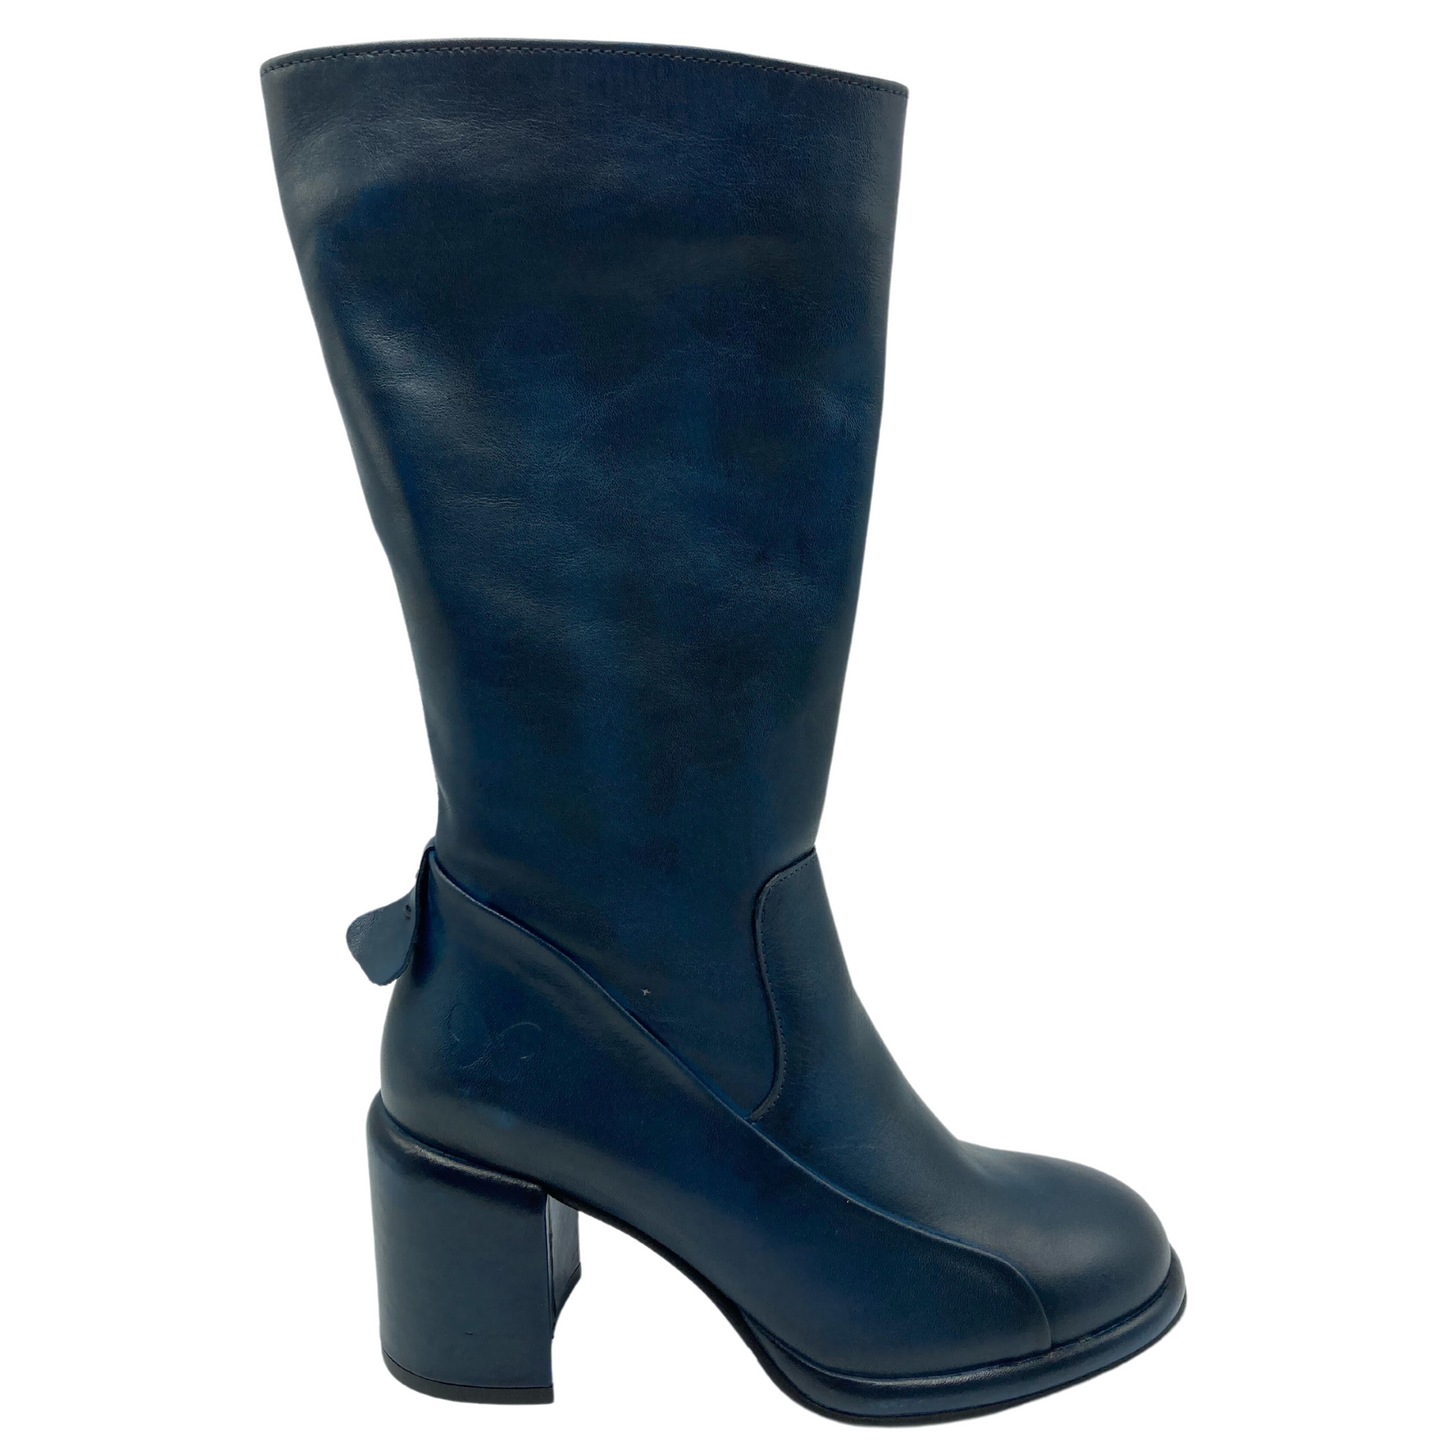 Right facing view of dark blue boot with wide calf and block heel